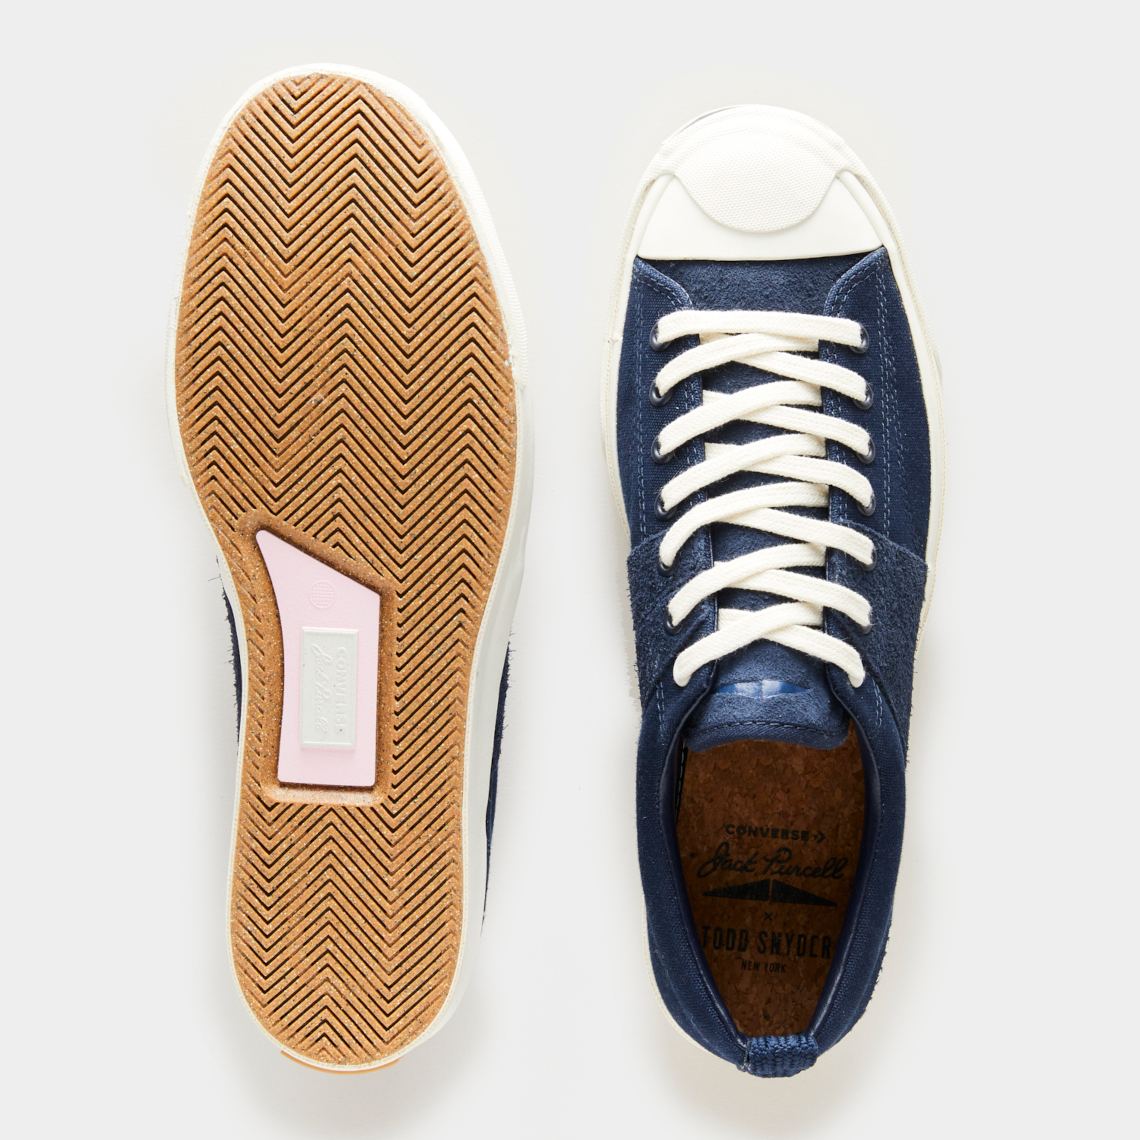 Todd Snyder Converse Jack Purcell 2021 5